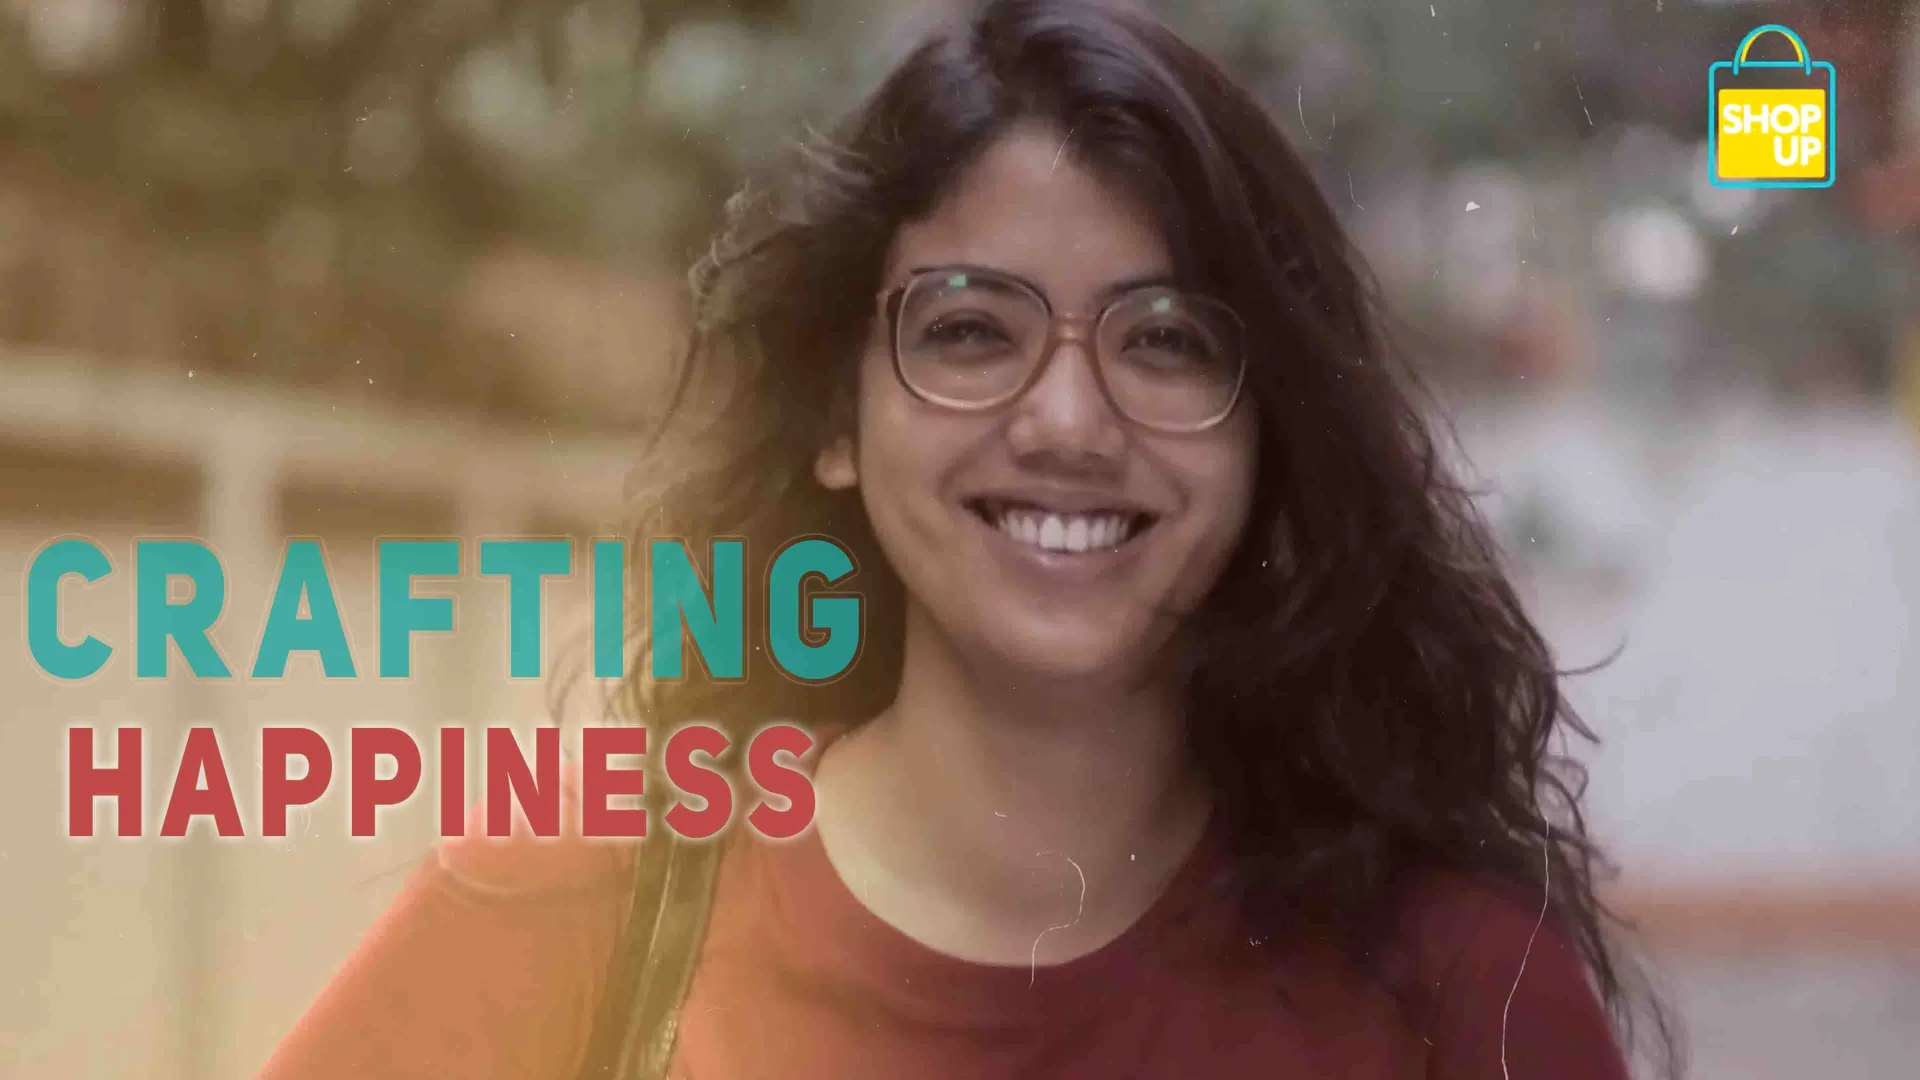 Thumbnail of Arif Sonnet's 'Crafting Happiness' Documentary: Exploring ShopUp's Journey.